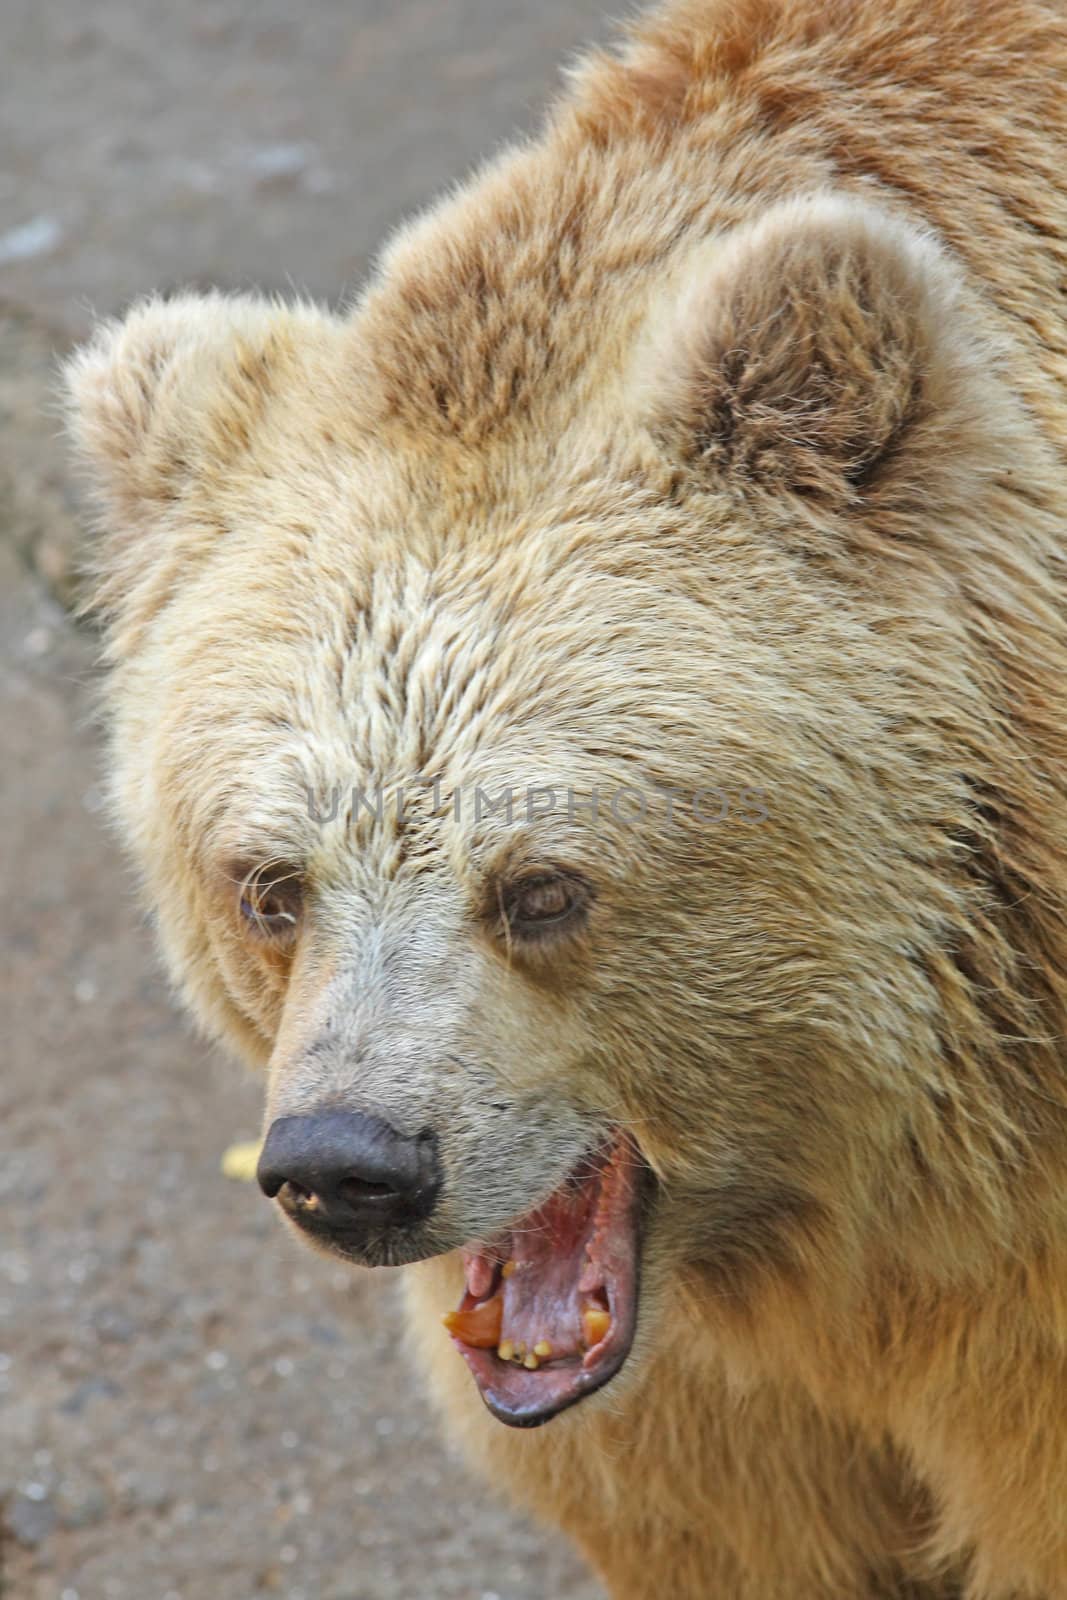 Close up of the angry growling bear.